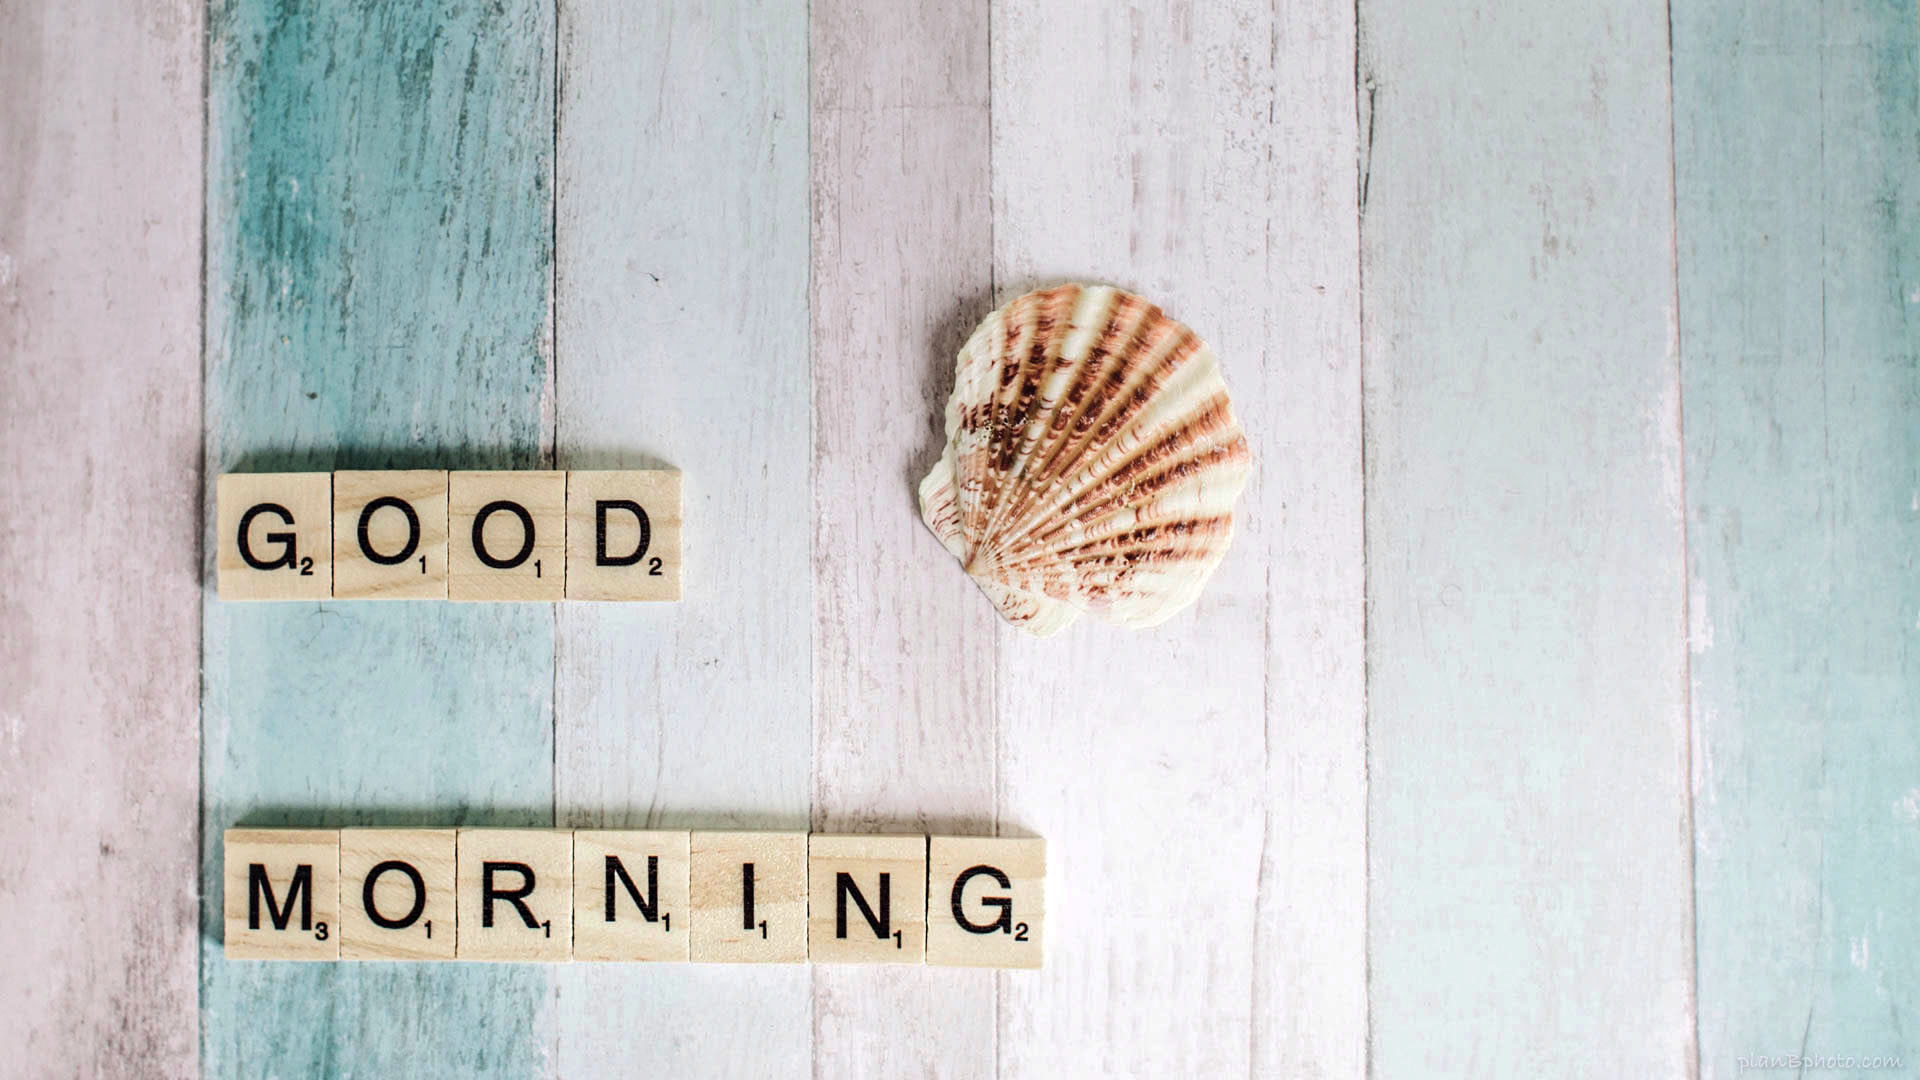 Good morning background image with a sea shell